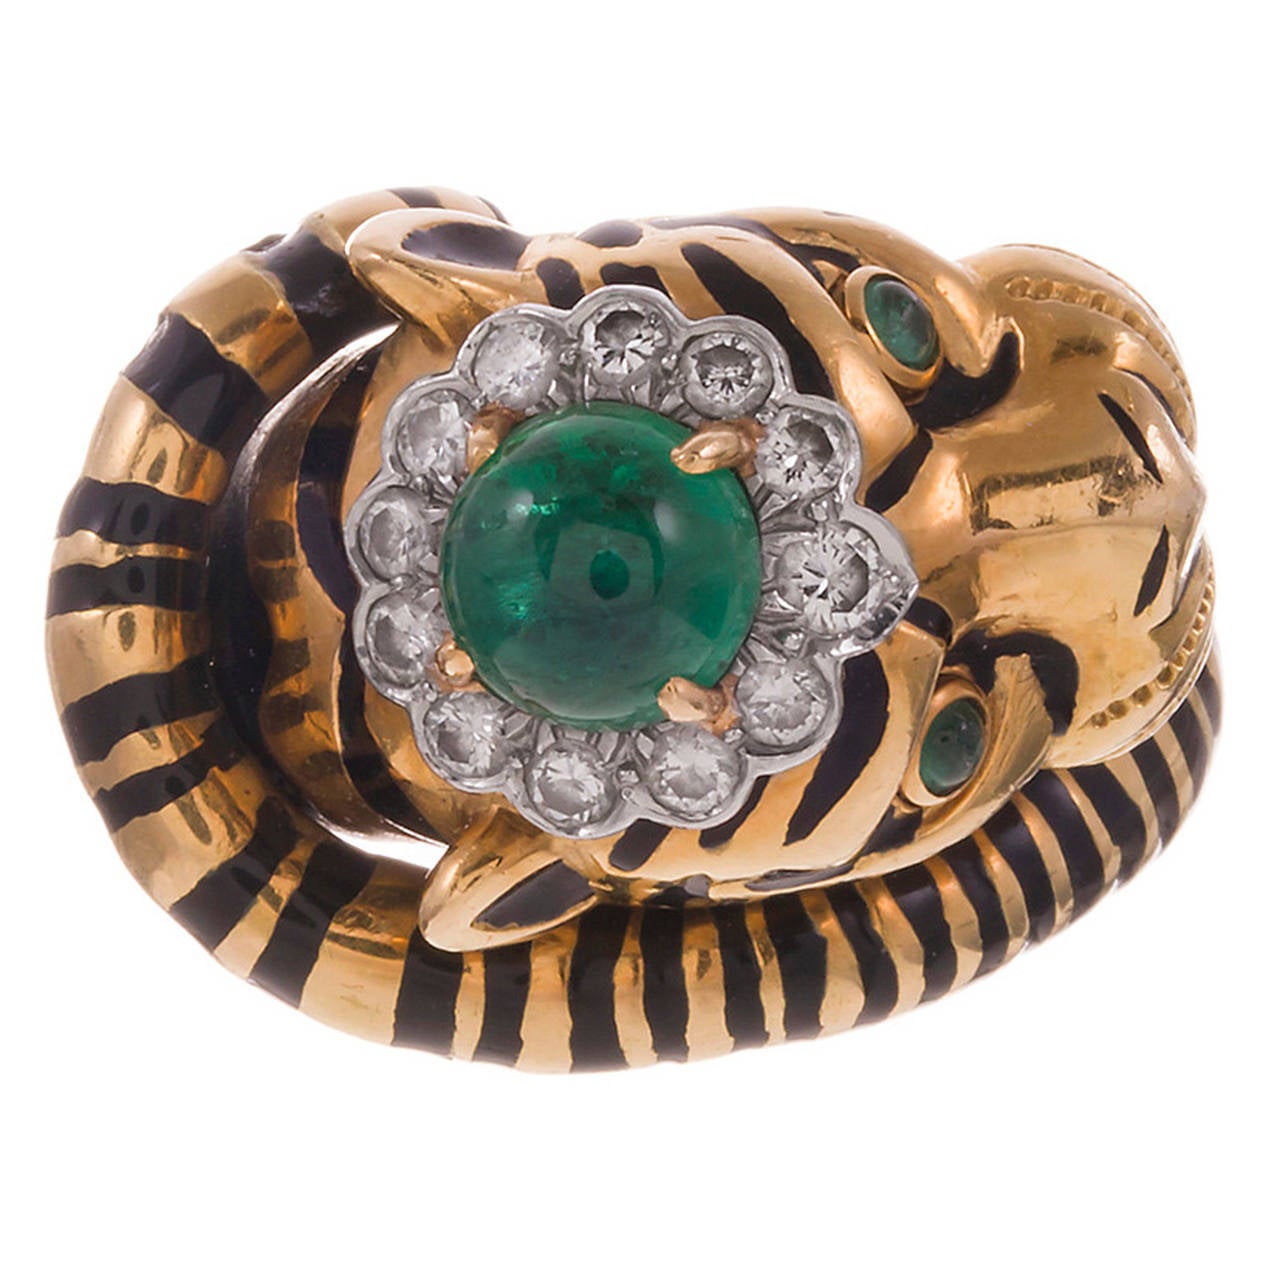 A tiger wearing an emerald-and-diamond hat… this ring can’t help but make you smile! The playful theme is enhanced by the skilled design and structure of this fine piece. It’s like a mini sculpture that can be carried with you everywhere! 

Made